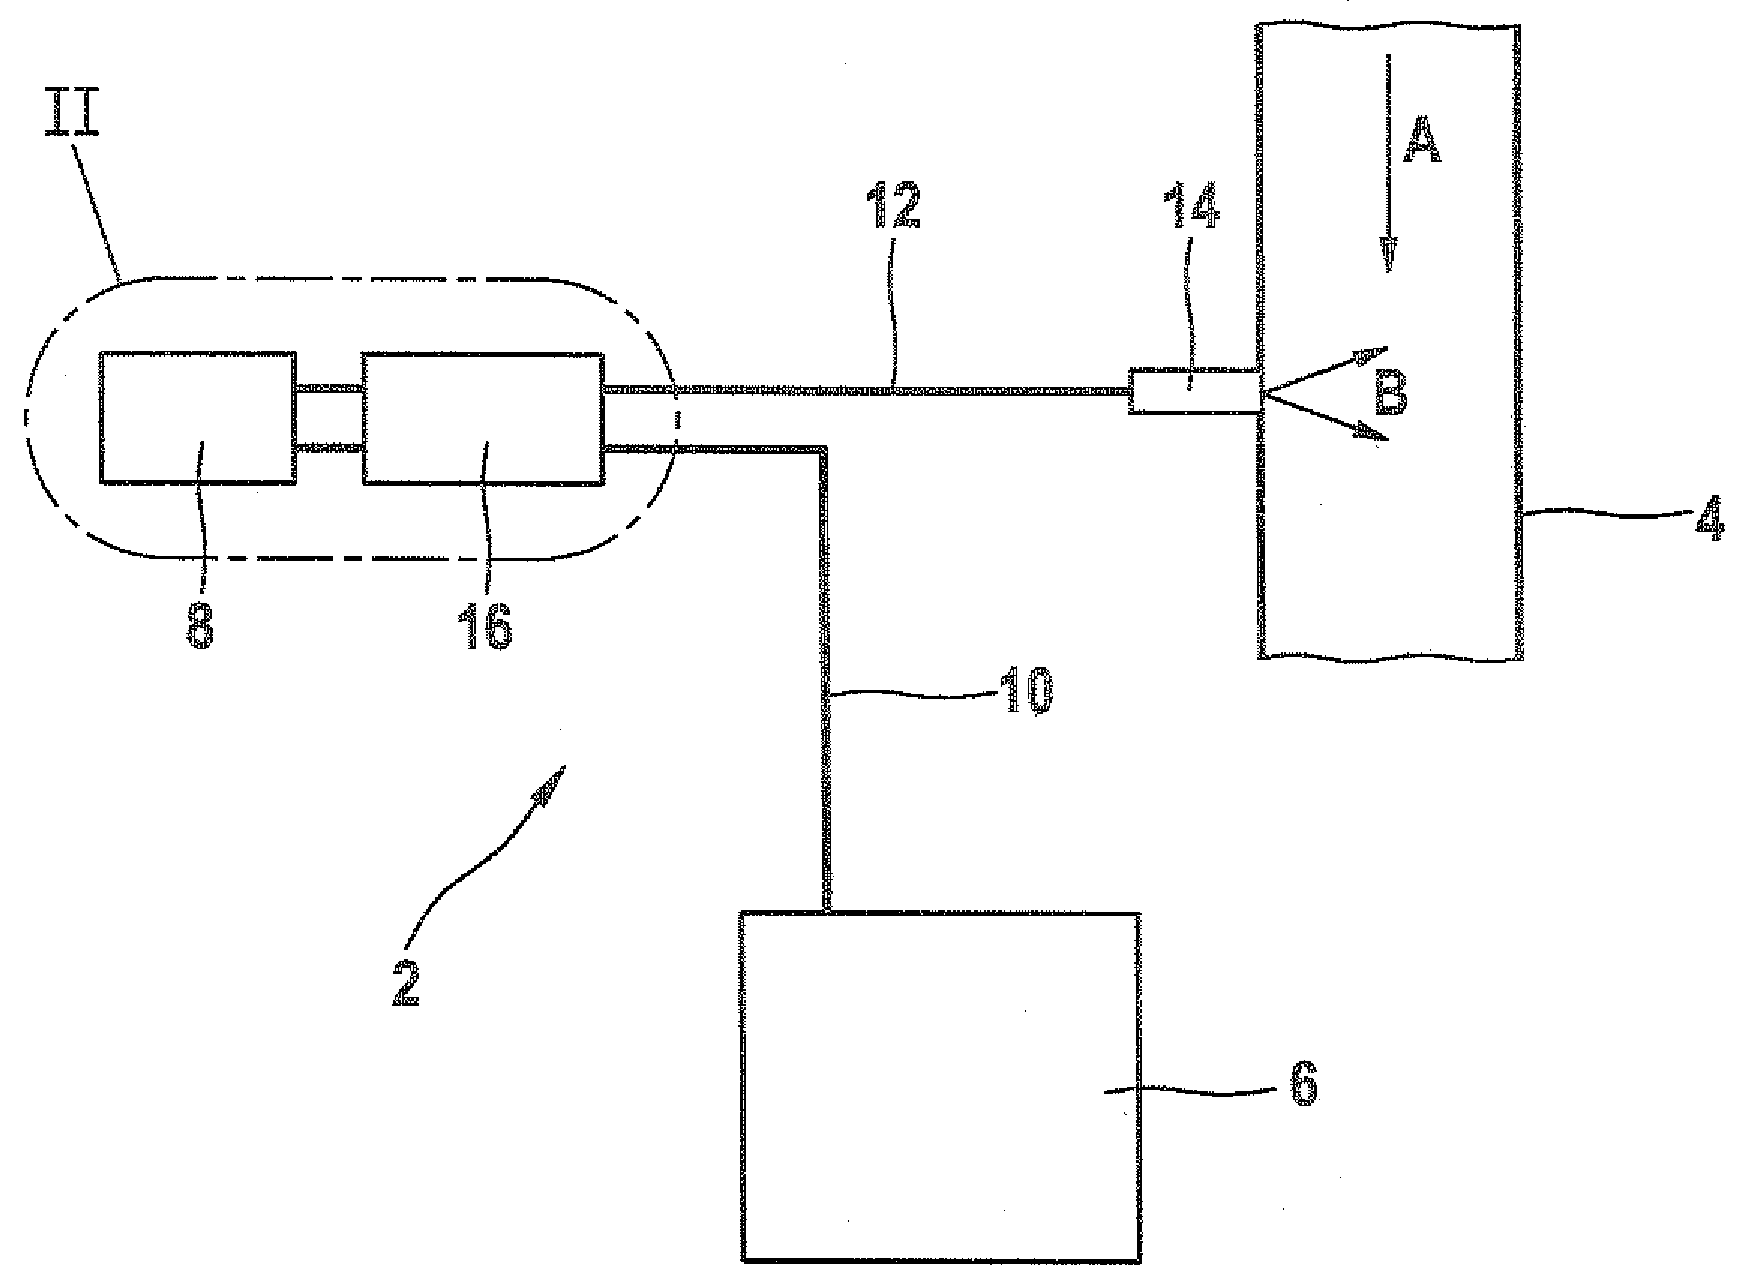 Device for delivering a reducing agent to an exhaust system of an internal combustion engine